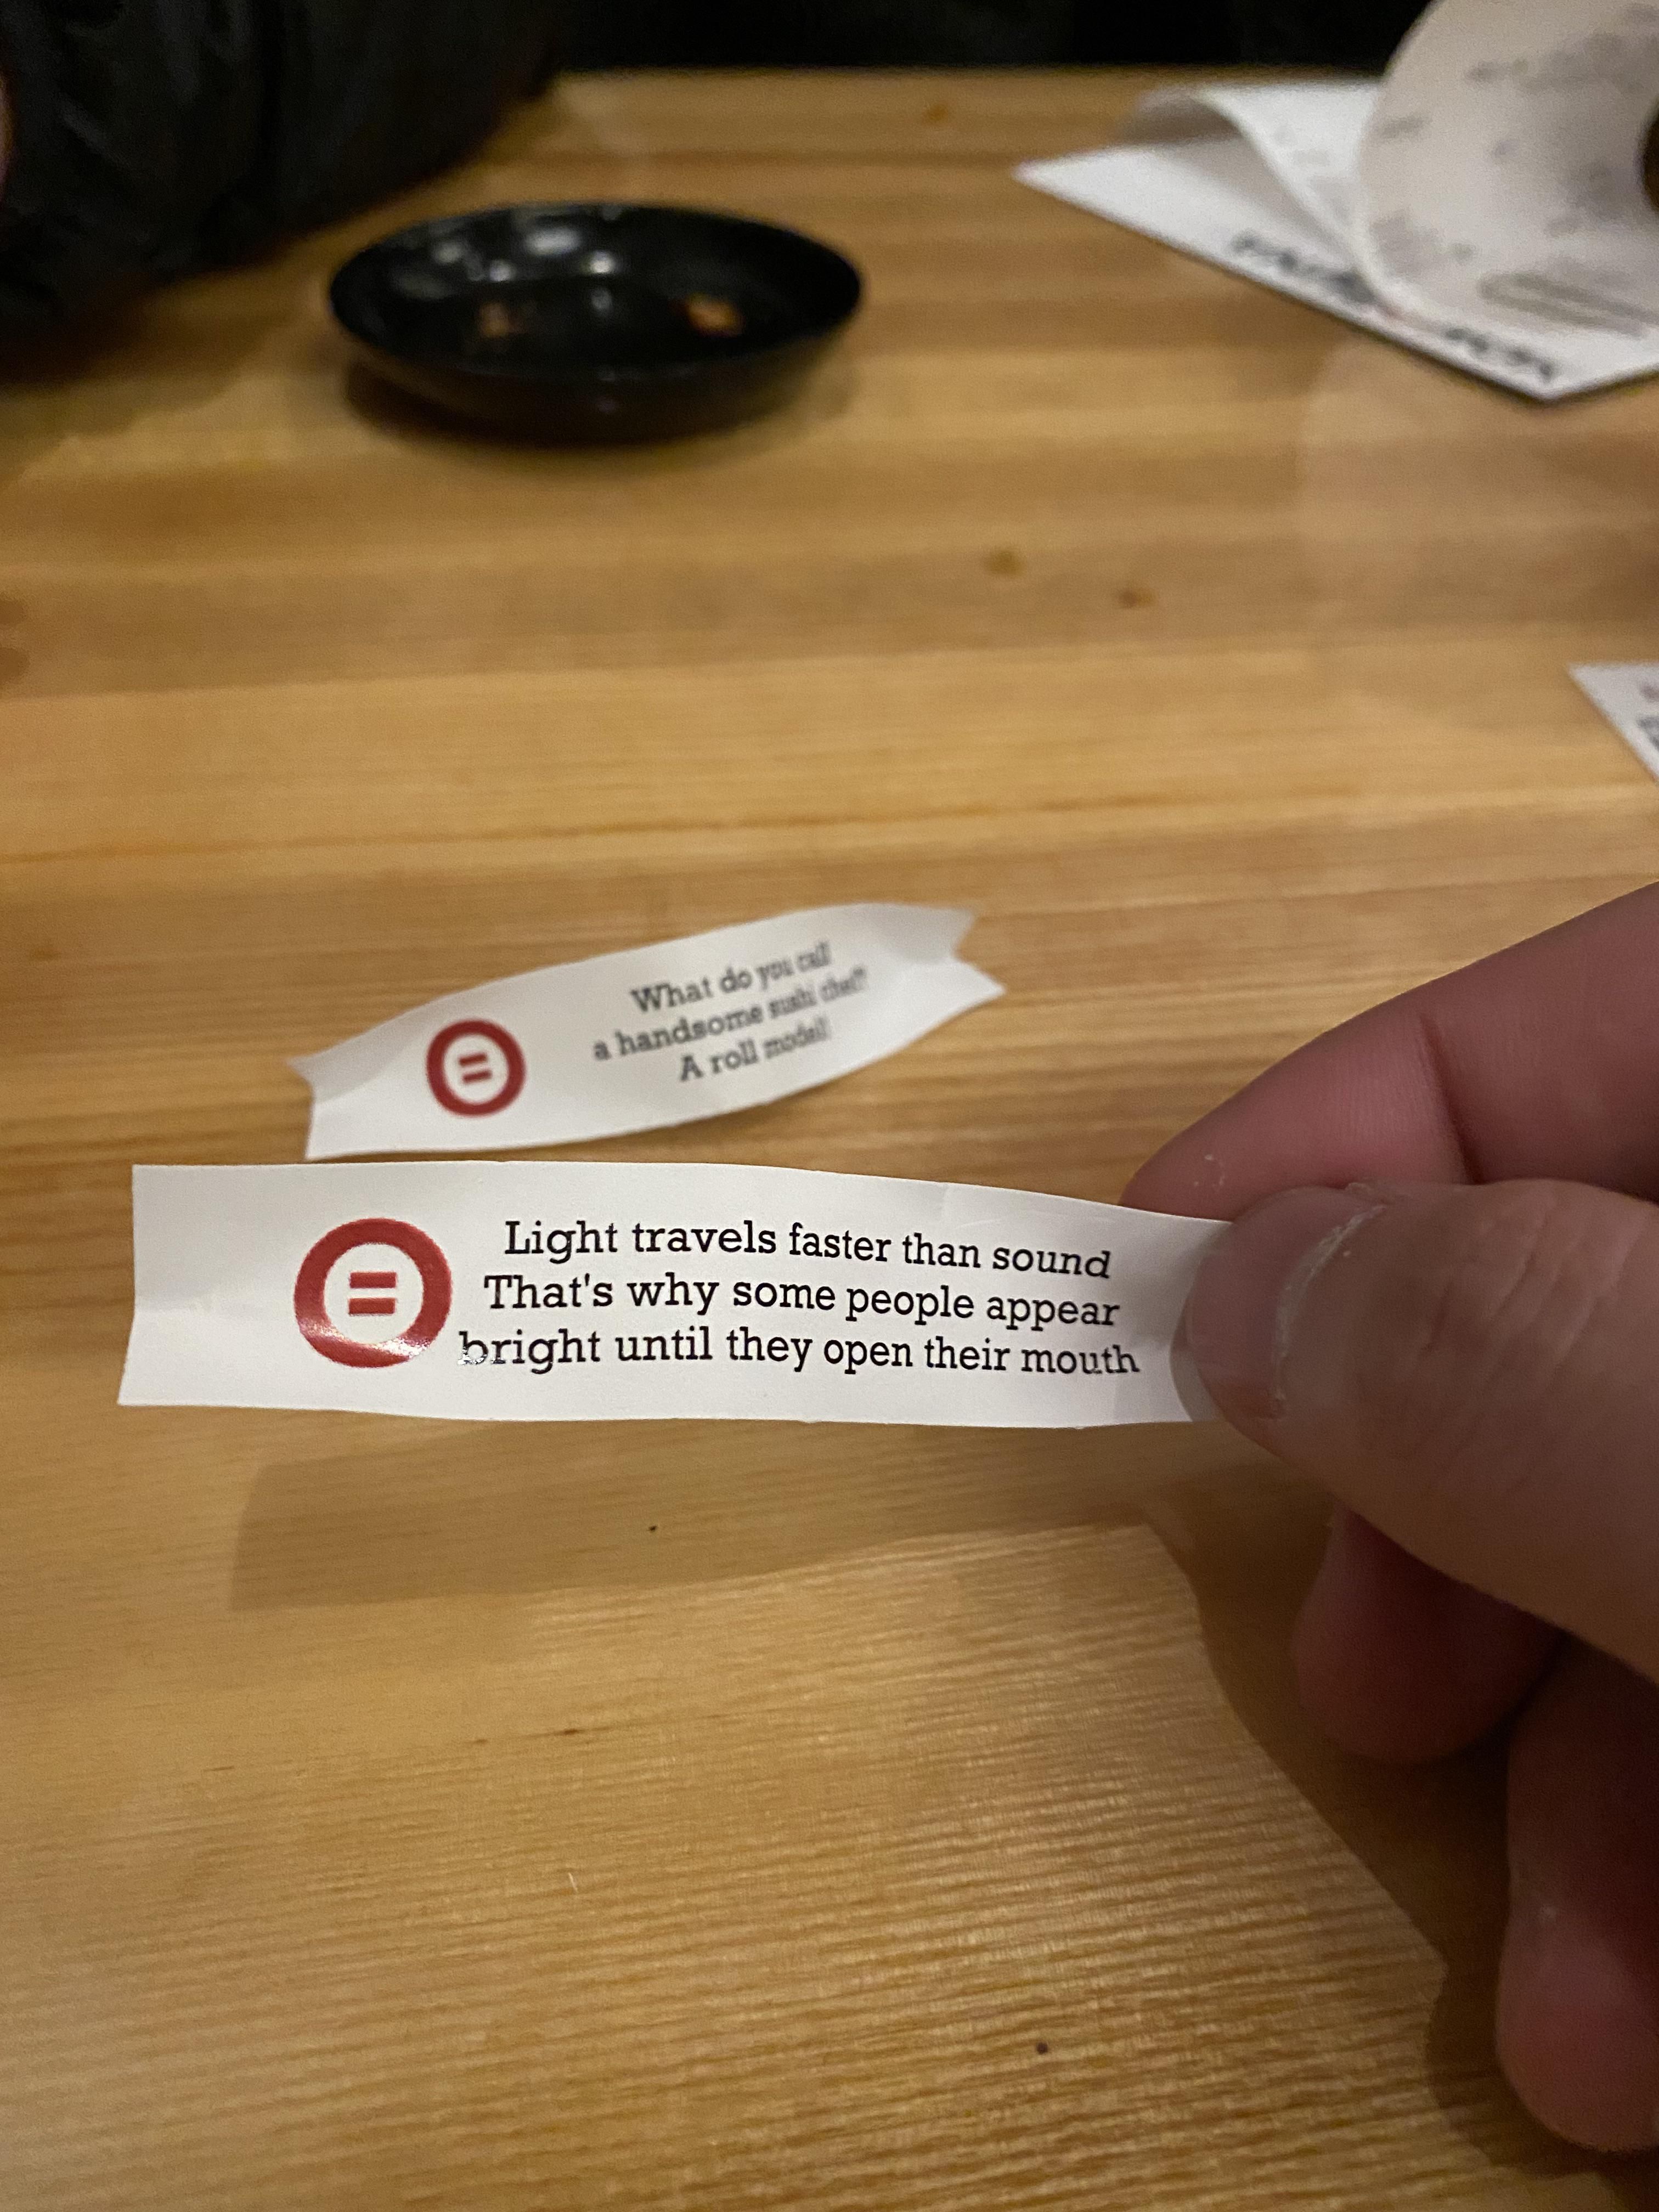 My wife and my “fortune” from our dinner.